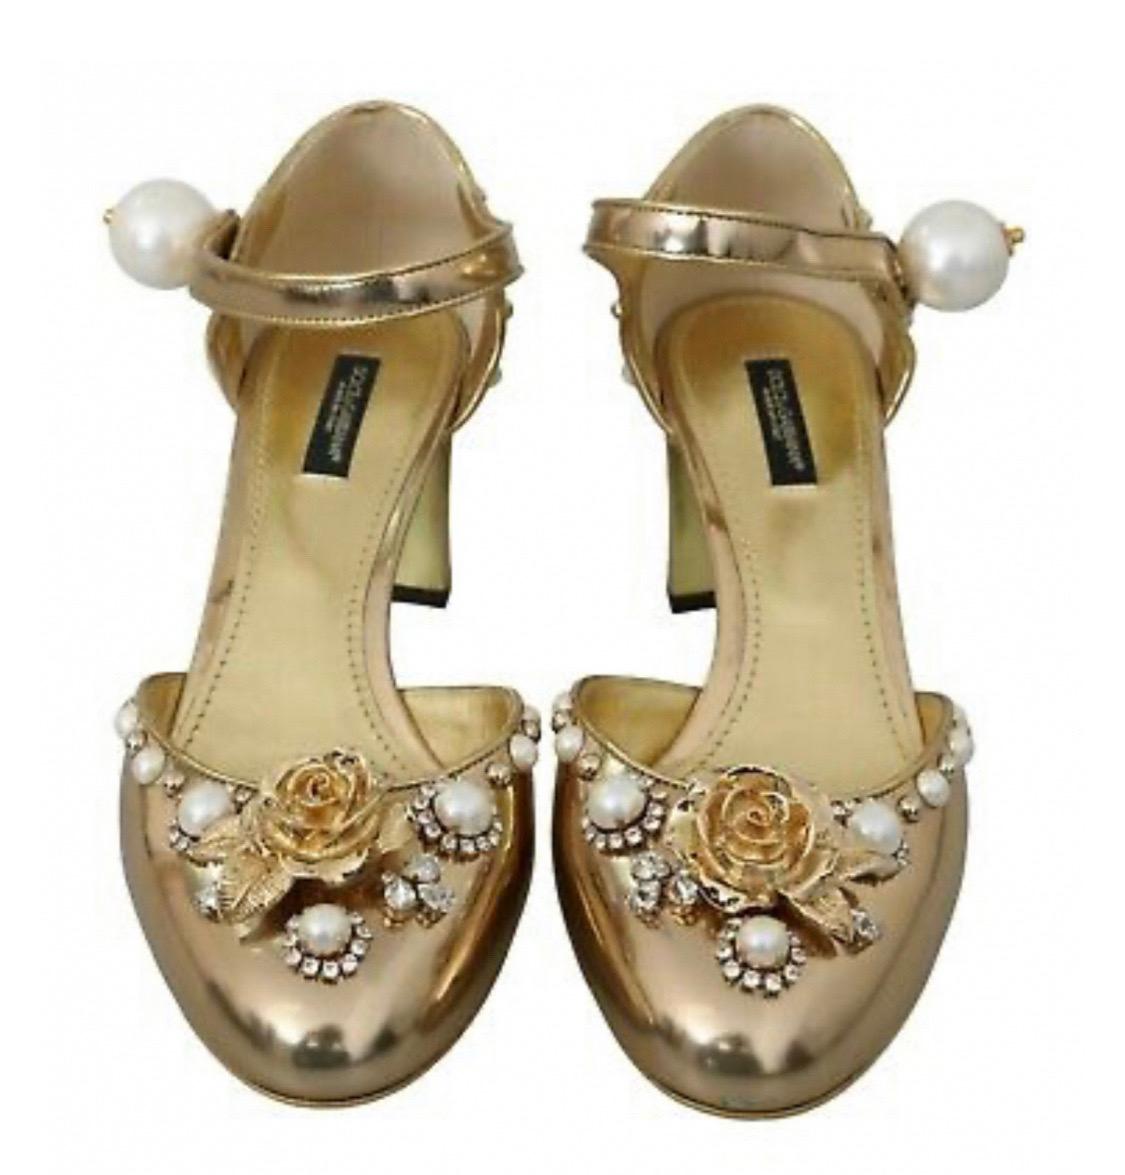 Dolce & Gabbana gold leather ankle strap sandals shoes heels  5